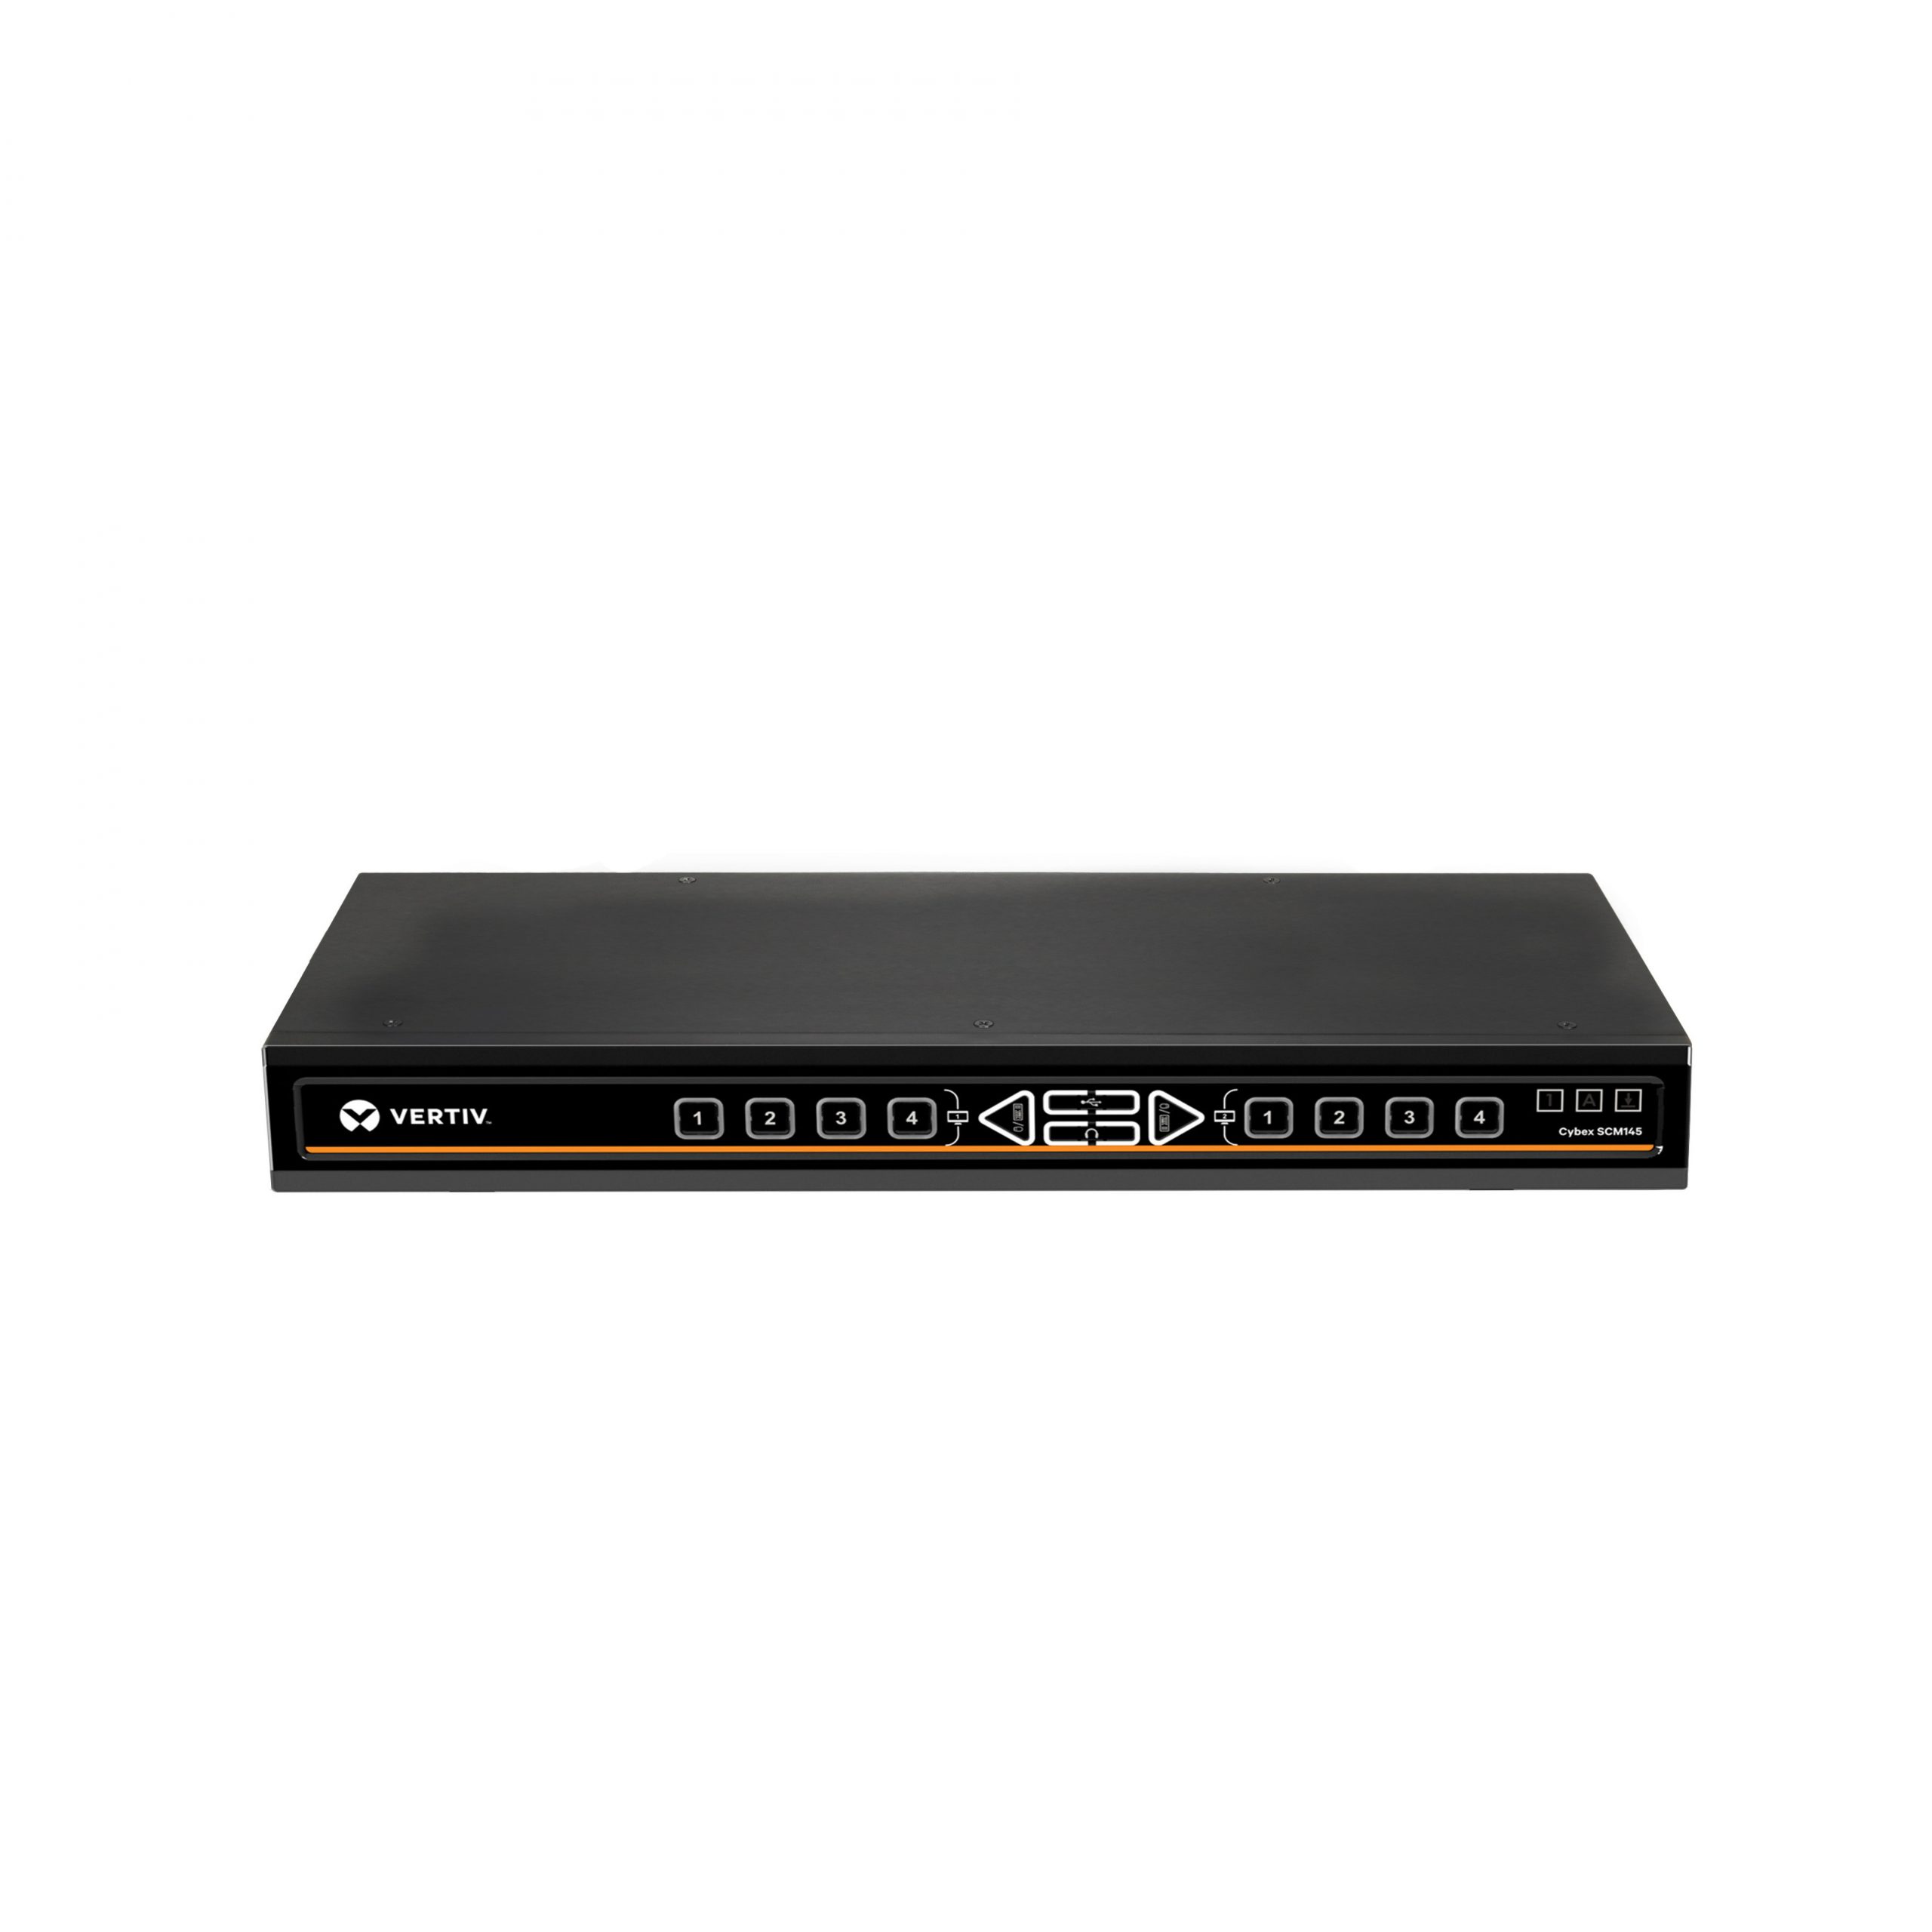 Vertiv Cybex SCM145H Secure KVM Switch4-Port, Dual Display, HDMI in, HDMI out, Secure Matrix KVM with DPP (Dedicated Peripheral Port) SCM145H-001